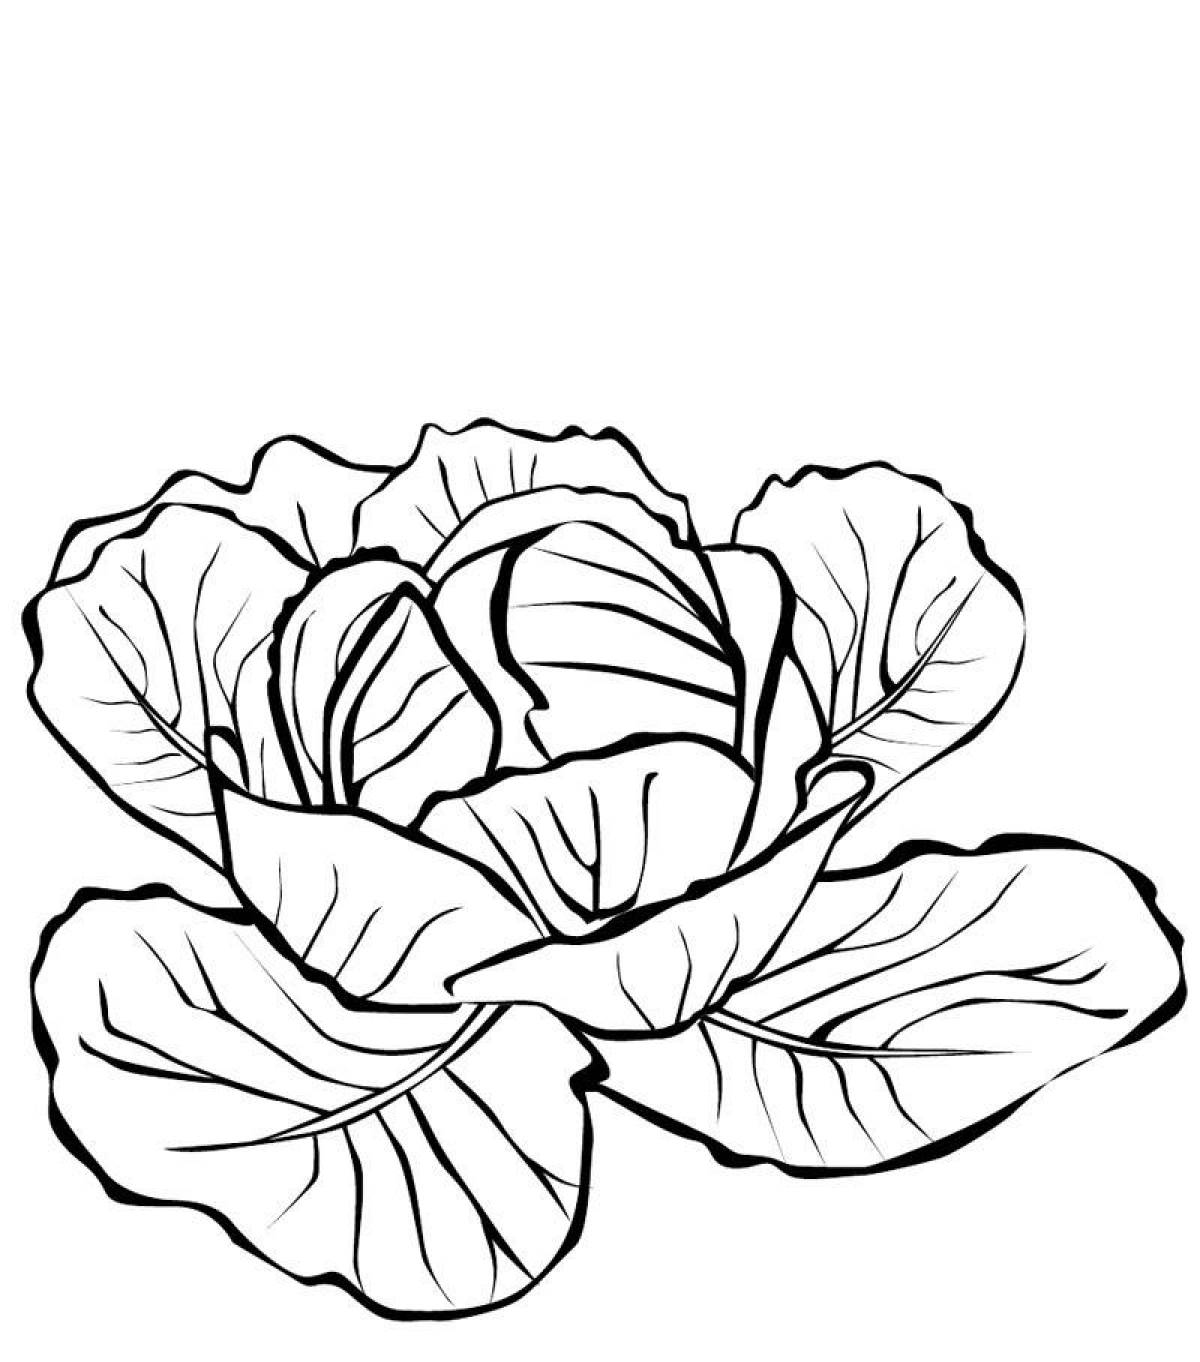 Colorful explosive cabbage coloring page for kids